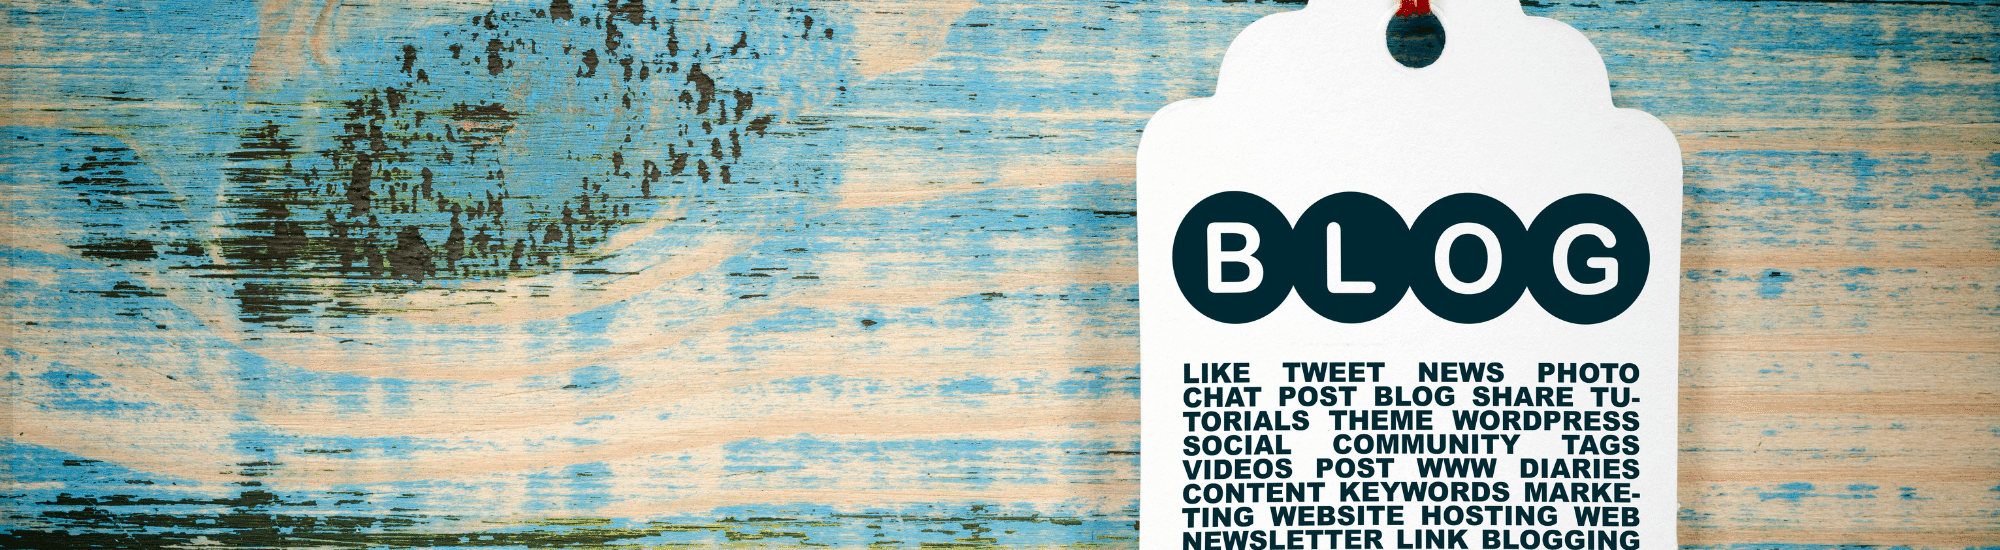 abstract background with tag saying 'BLOG'